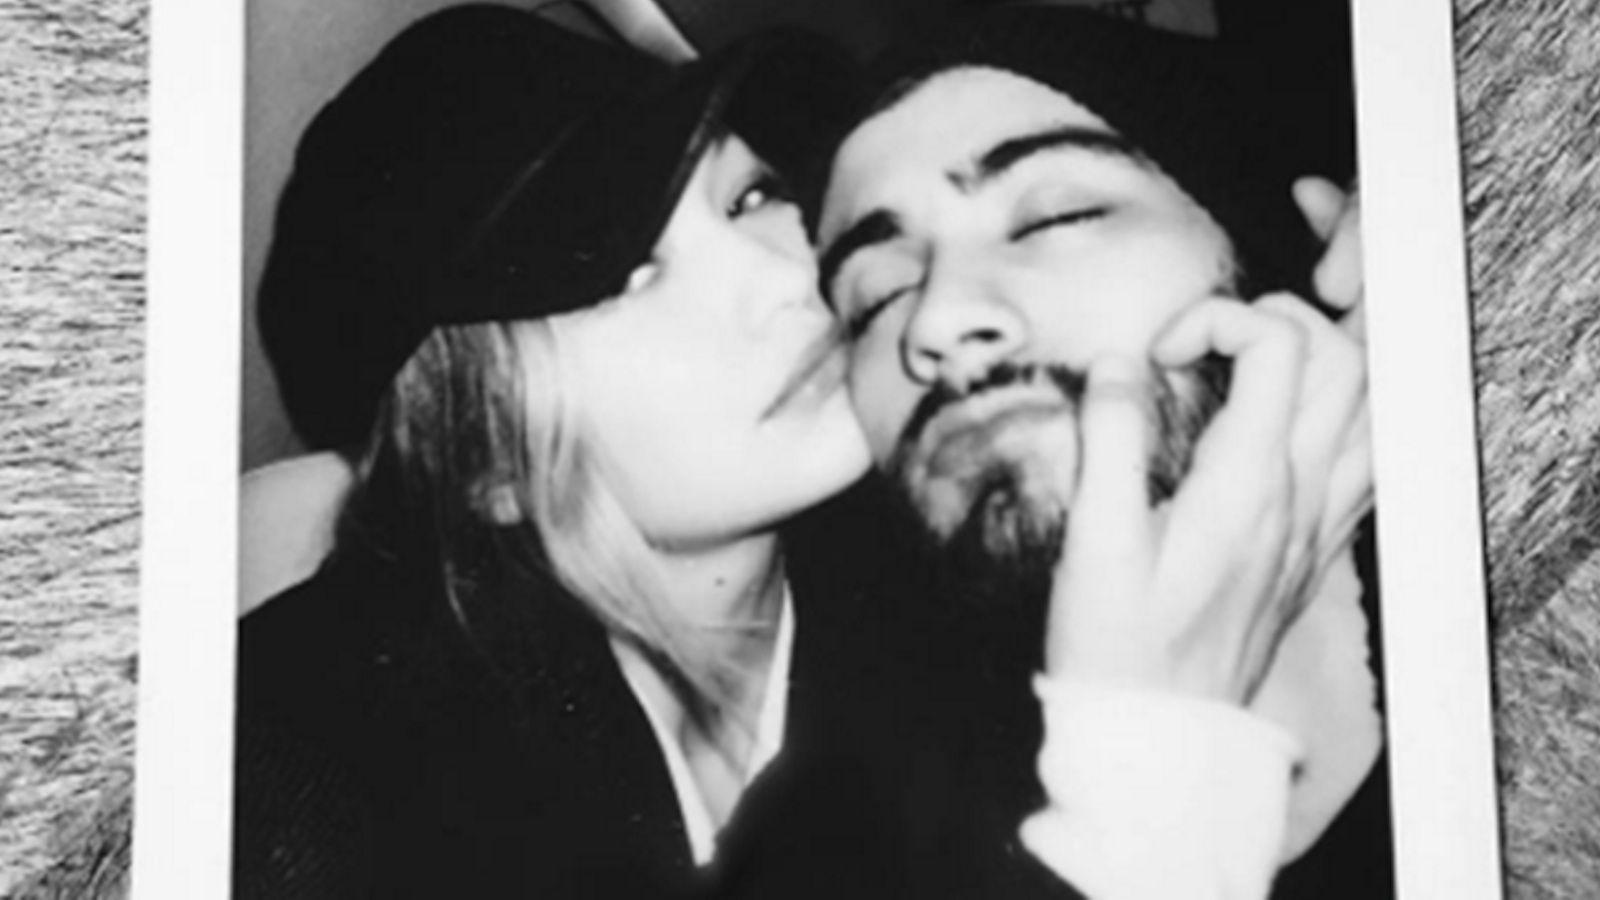 Gigi Hadid Has a Picture of Zayn Malik as Her Phone Background: Photo  3556170, Gigi Hadid, Zayn Malik Photos